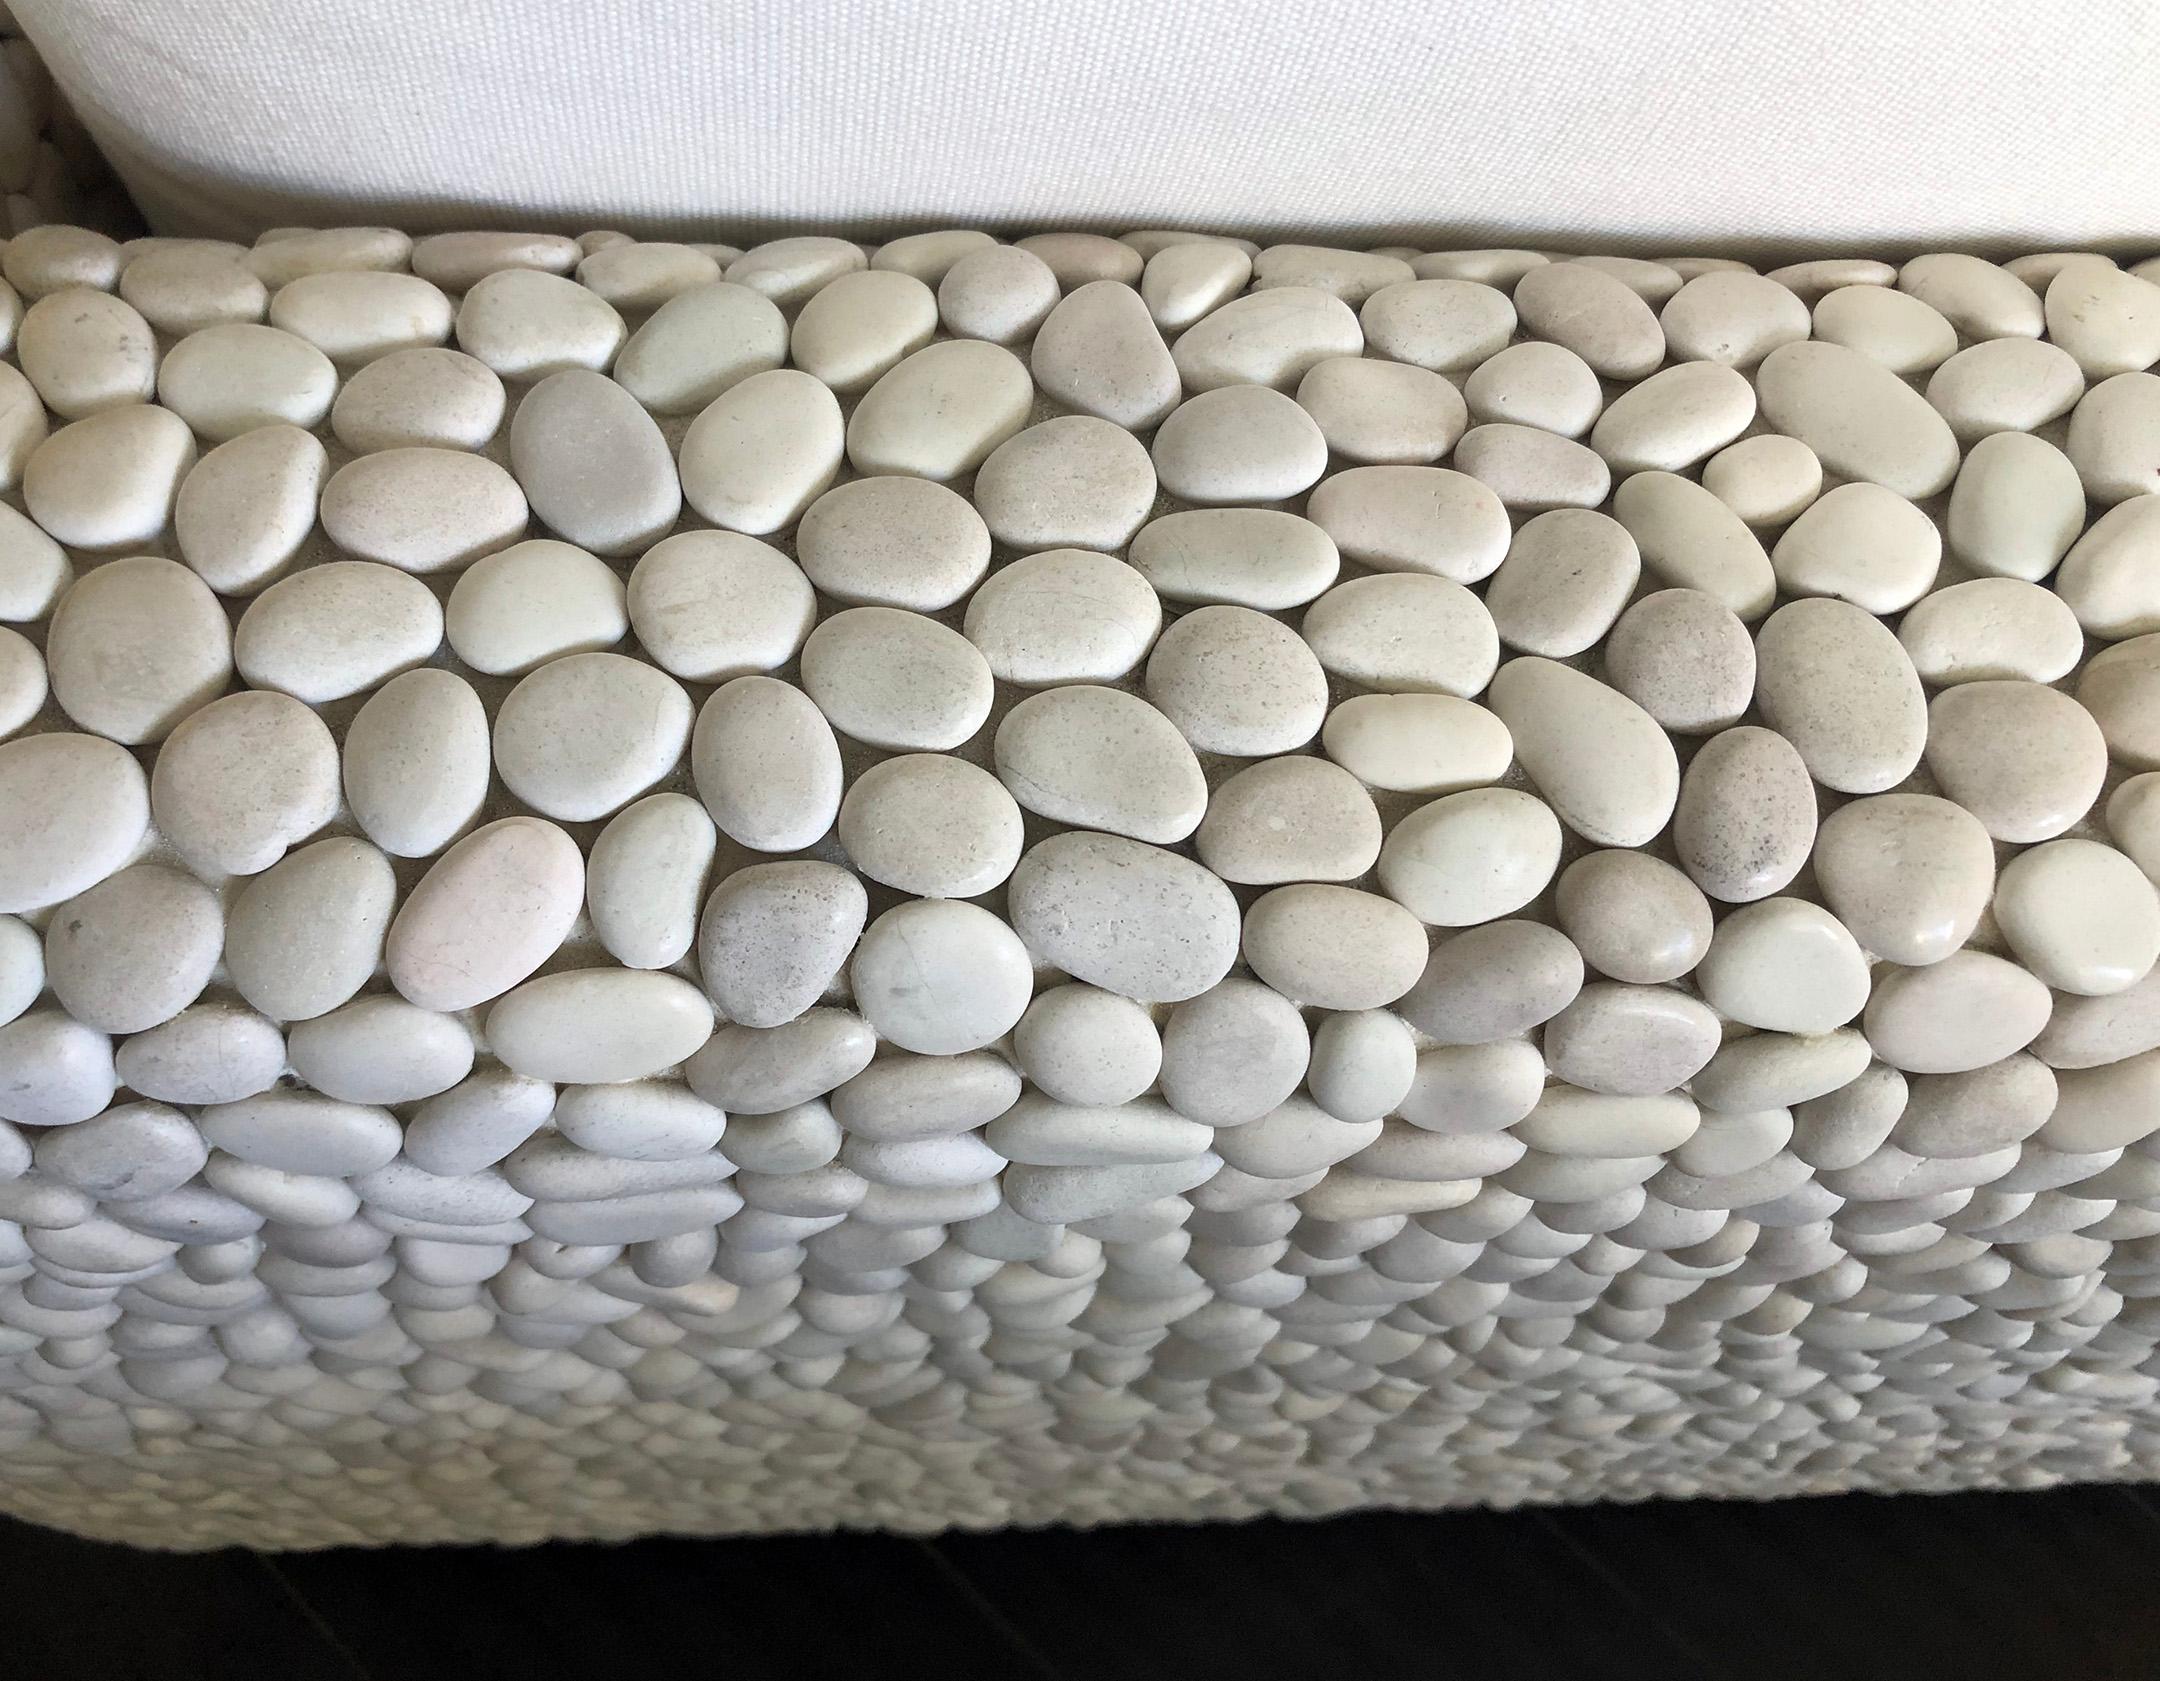 Stylish, modern, and comfortable. This indoor/outdoor lounge chair is entirely clad in naturally white river pebbles. It is upholstered in a linen colored Sunbrella type duck fabric. A wonderful statement piece that would look incredible in any